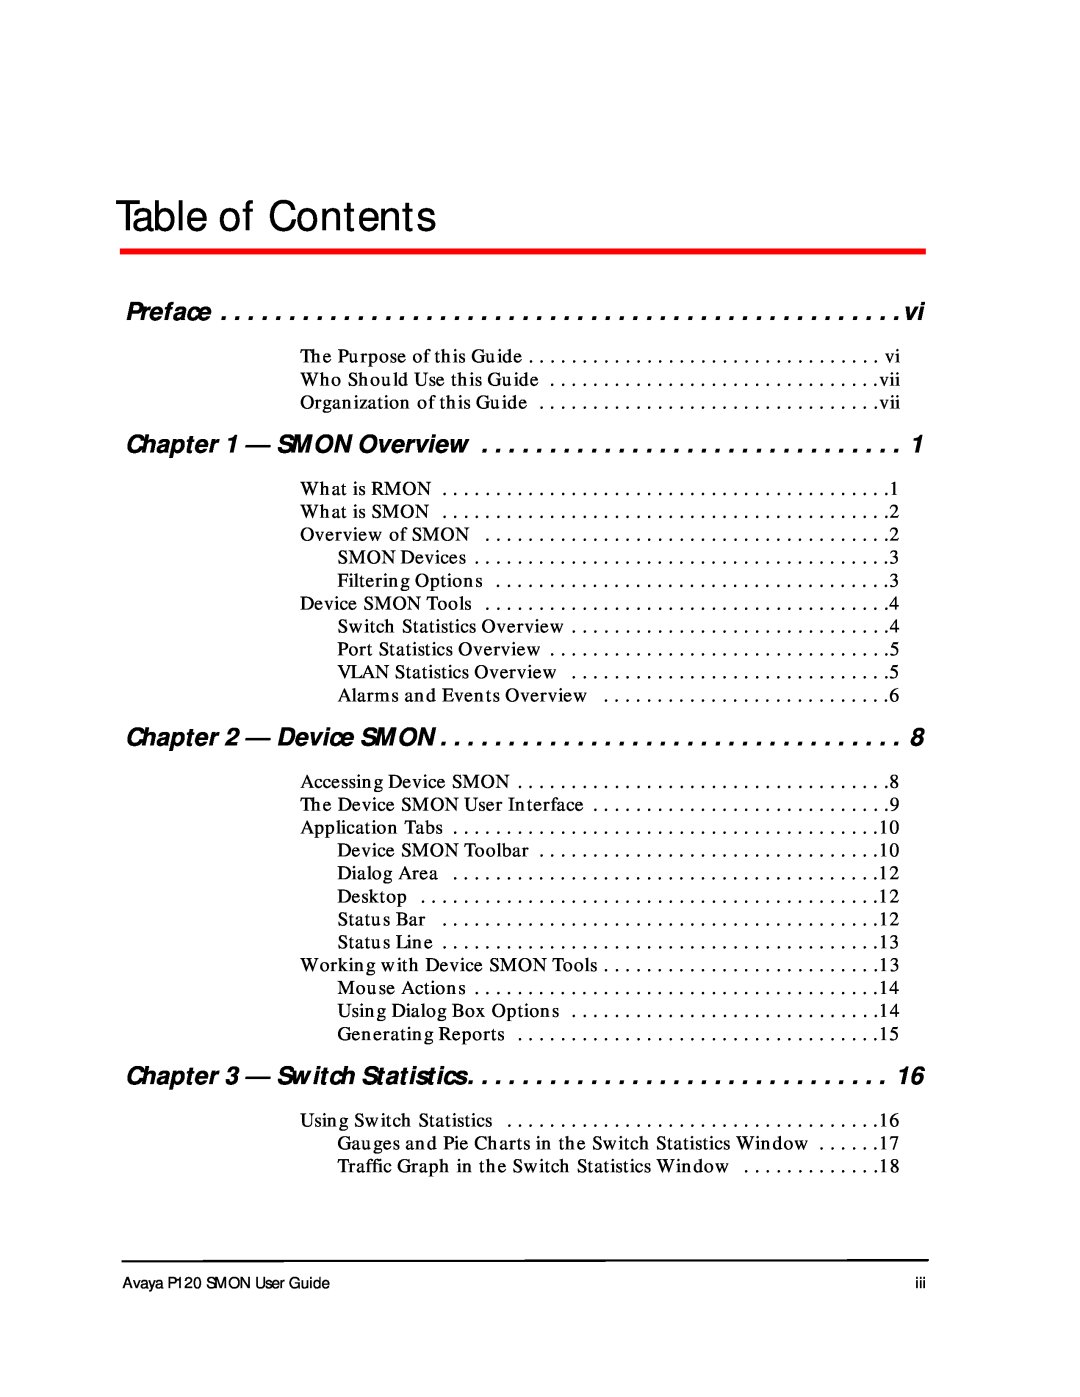 Avaya P120 SMON manual Preface, SMON Overview, Device SMON, Switch Statistics, Table of Contents 